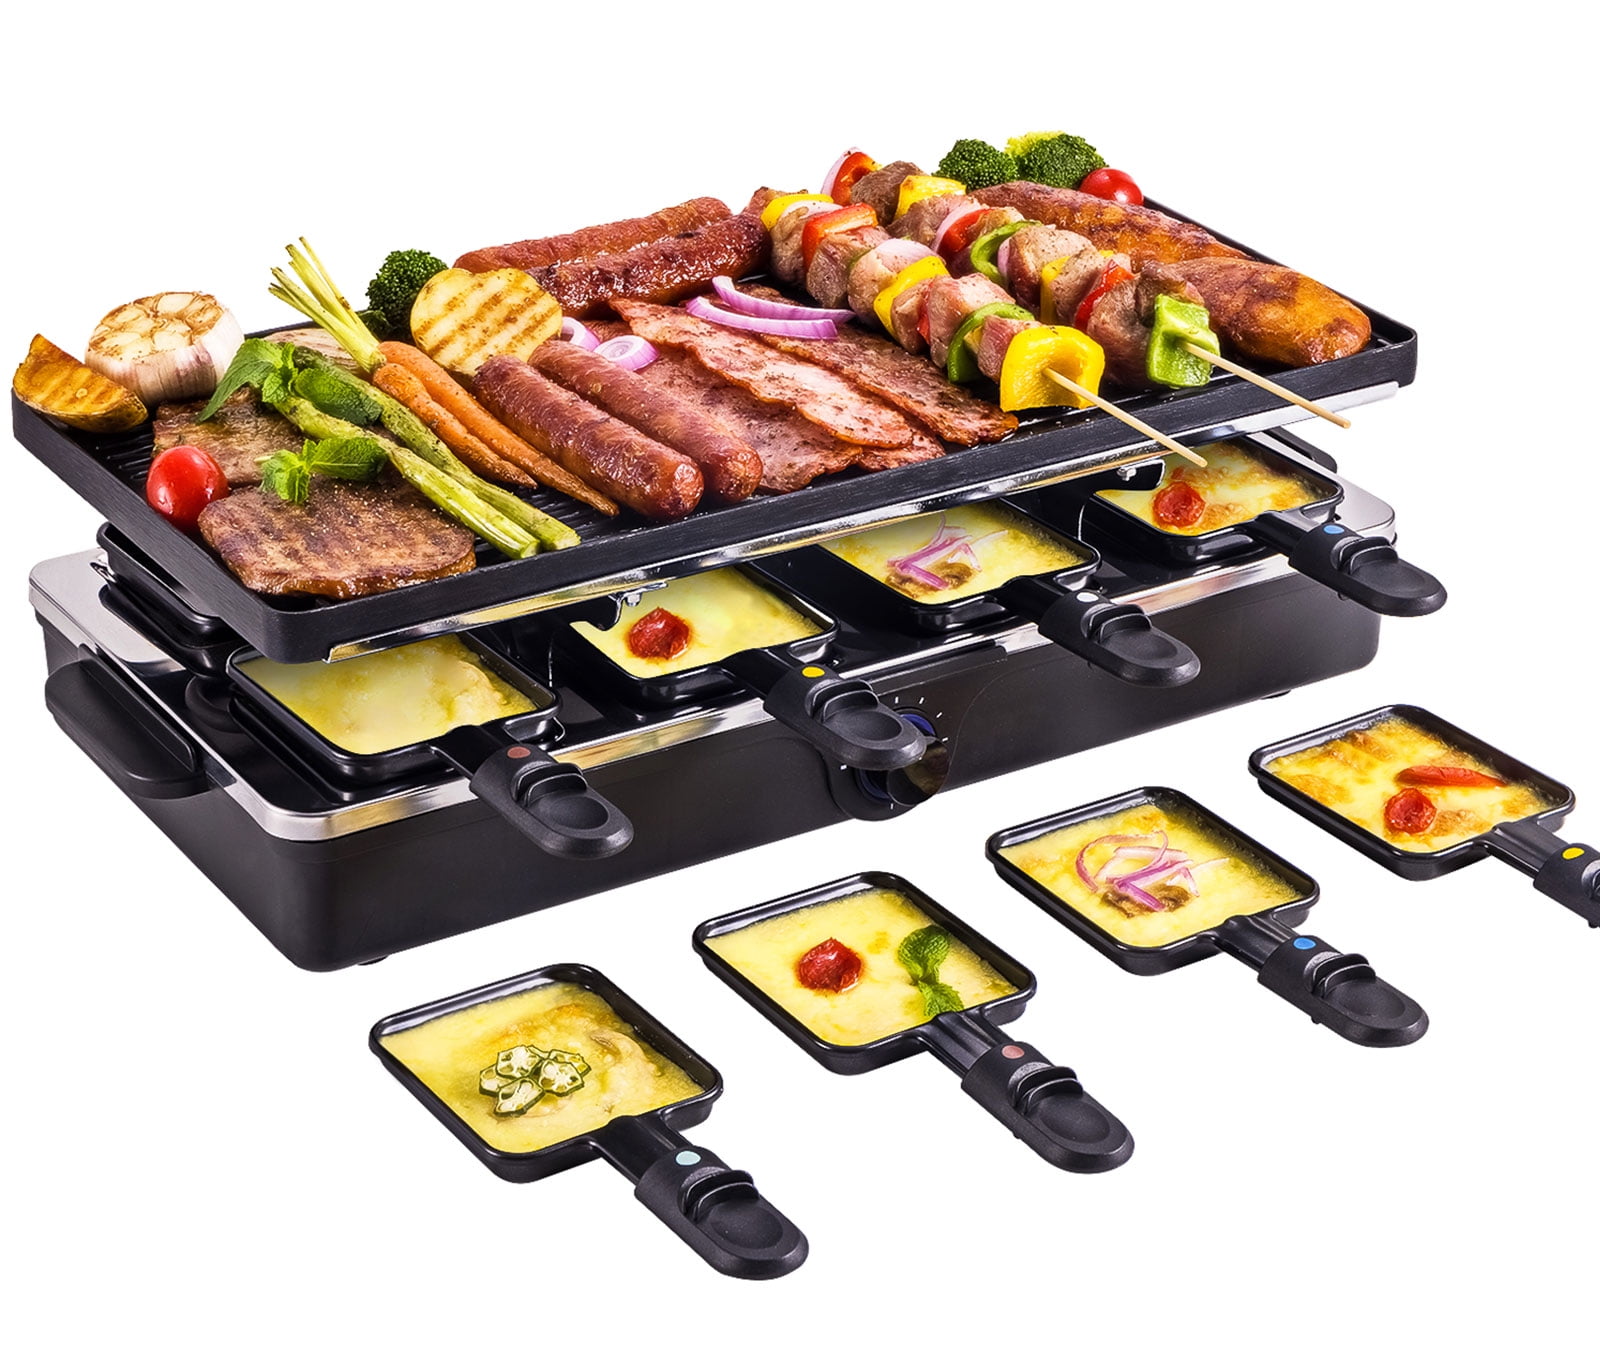 1500 Watts with 8 Mini Pans Raclette Grill Smokeless Indoor BBQ Table Electric Grill Korean Style Barbecue Non-Stick Griddle Plate 